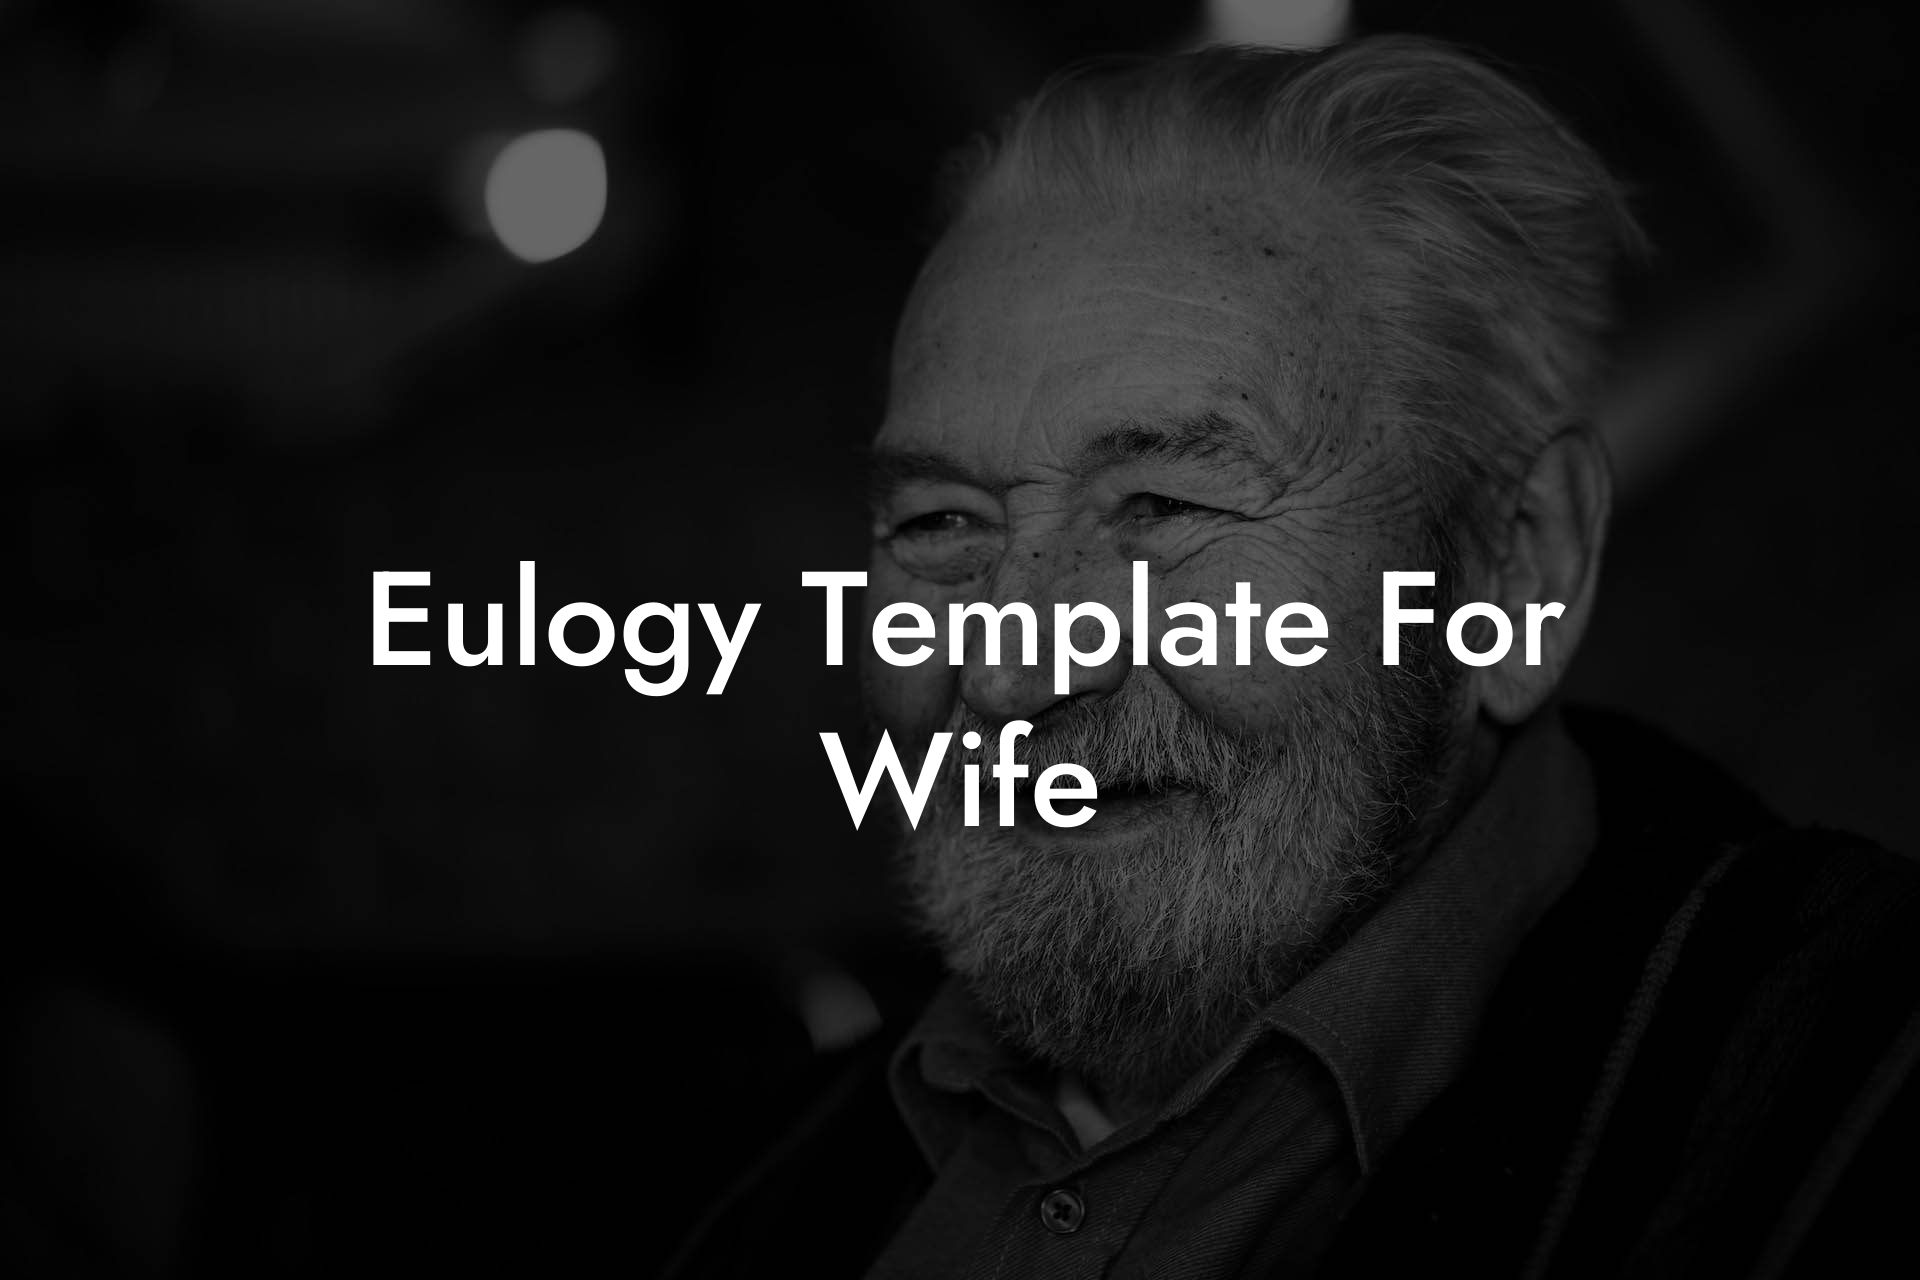 Eulogy Template For Wife